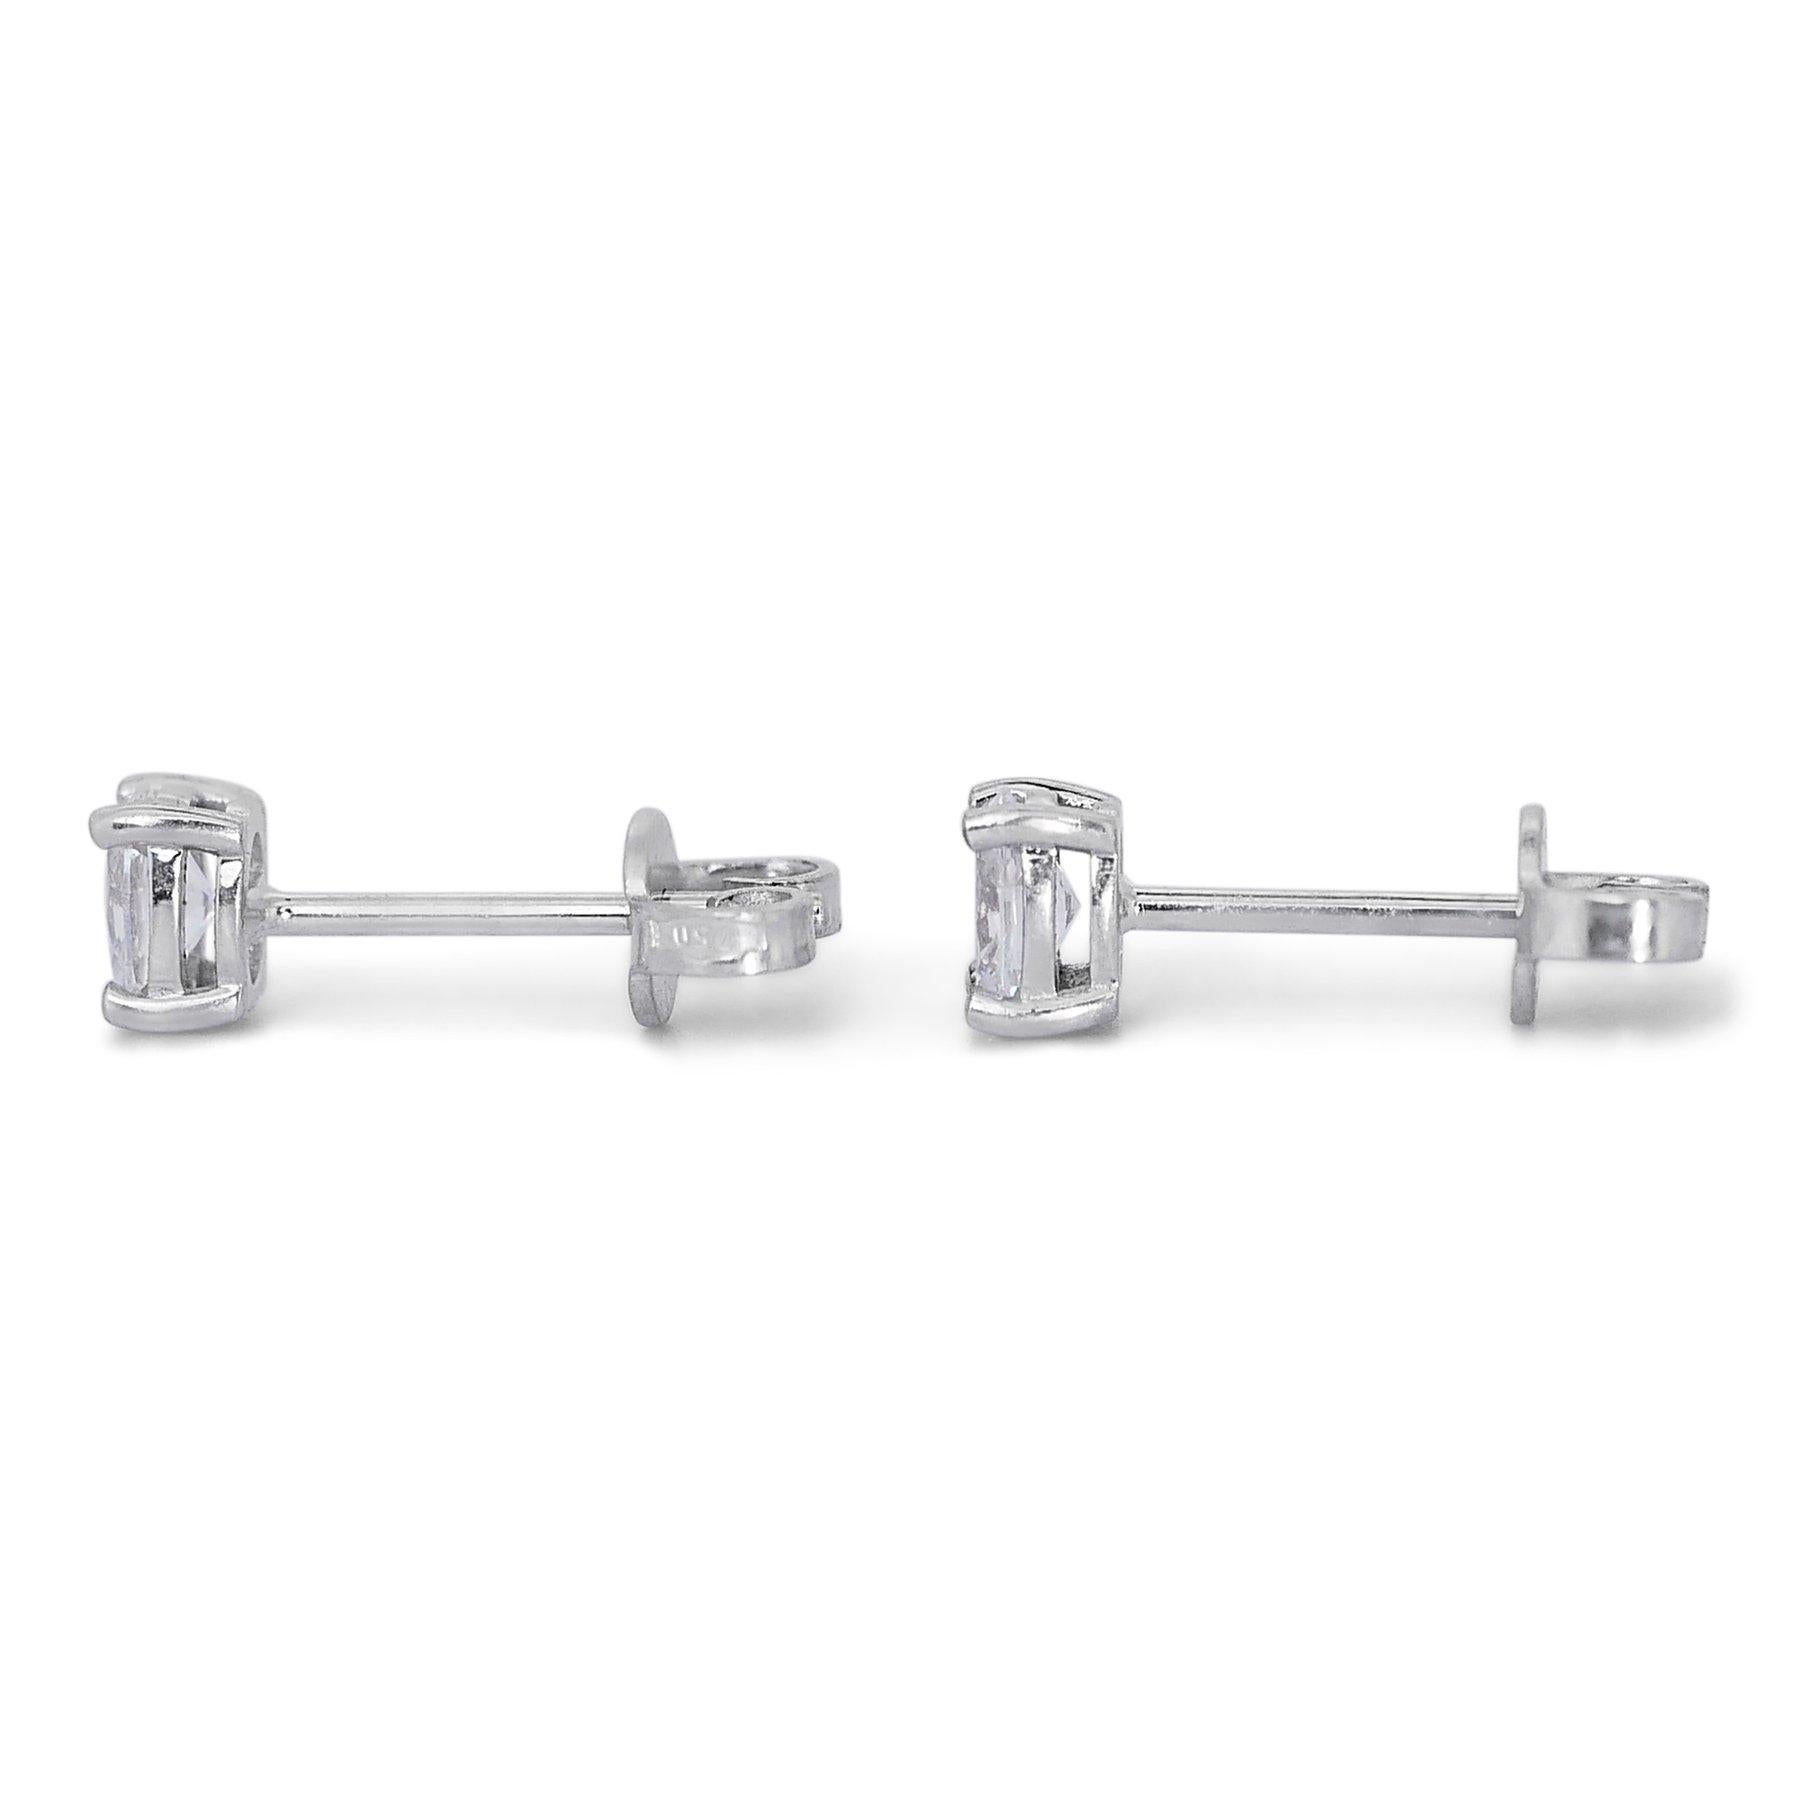 Exquisite 1.40ct Oval Diamond Stud Earrings in 18k White Gold - GIA Certified In New Condition For Sale In רמת גן, IL